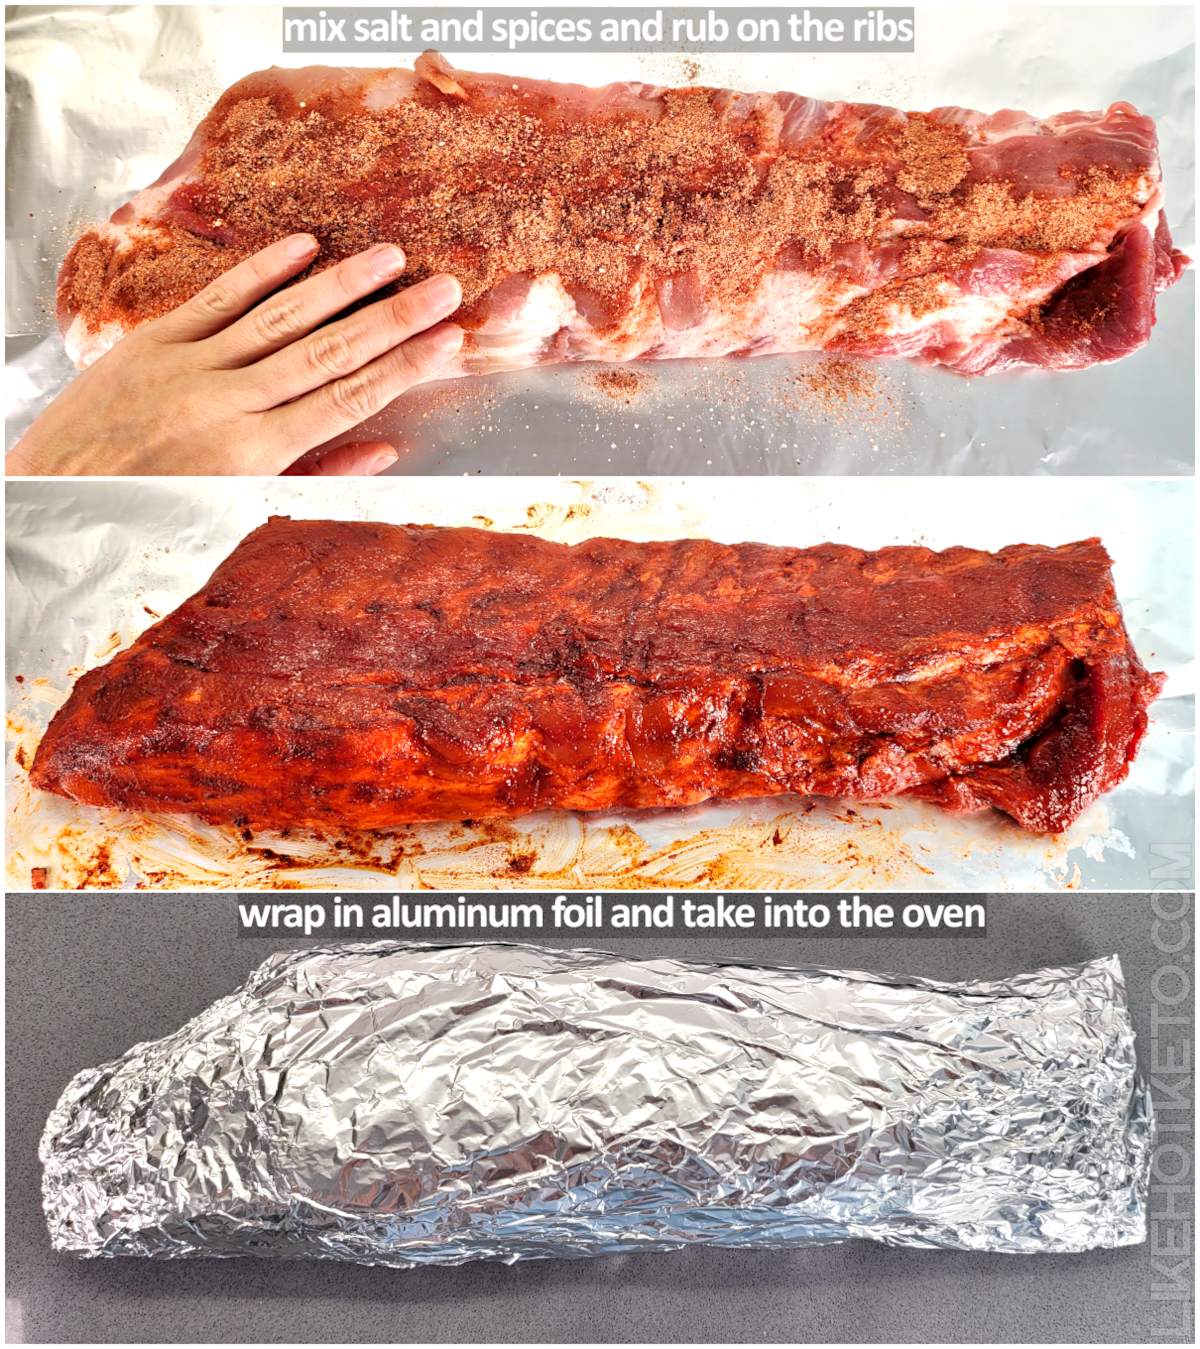 Step by step collage showing preparation of the chipotle pork ribs recipe, reading "mix salt and spices and rub on the ribs" and "wrap in aluminum foil and take into the oven".